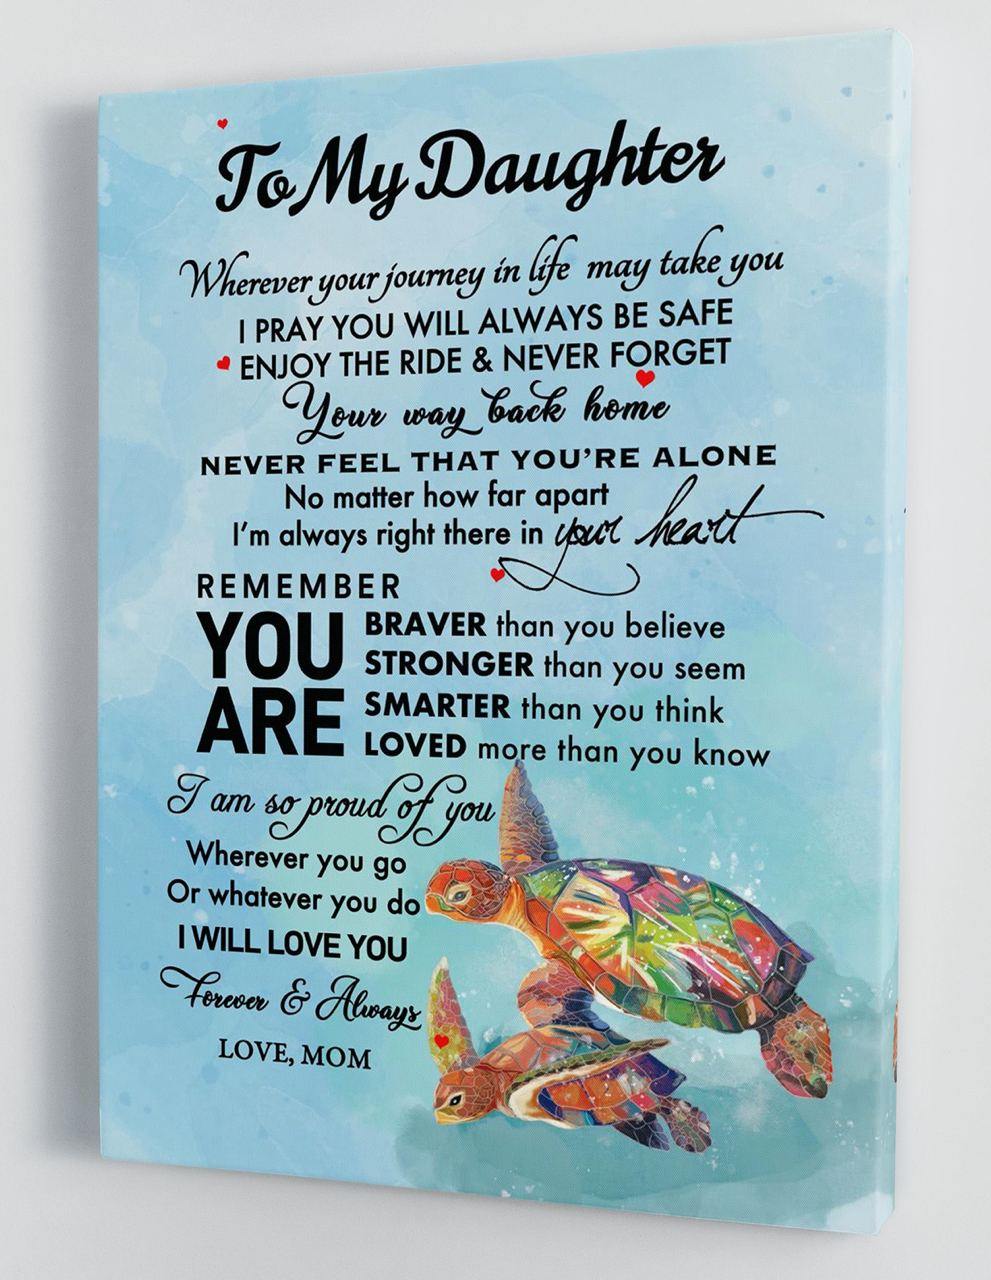 To My Daughter - From Mom - Framed Canvas Gift MD056 - DivesArt LLC